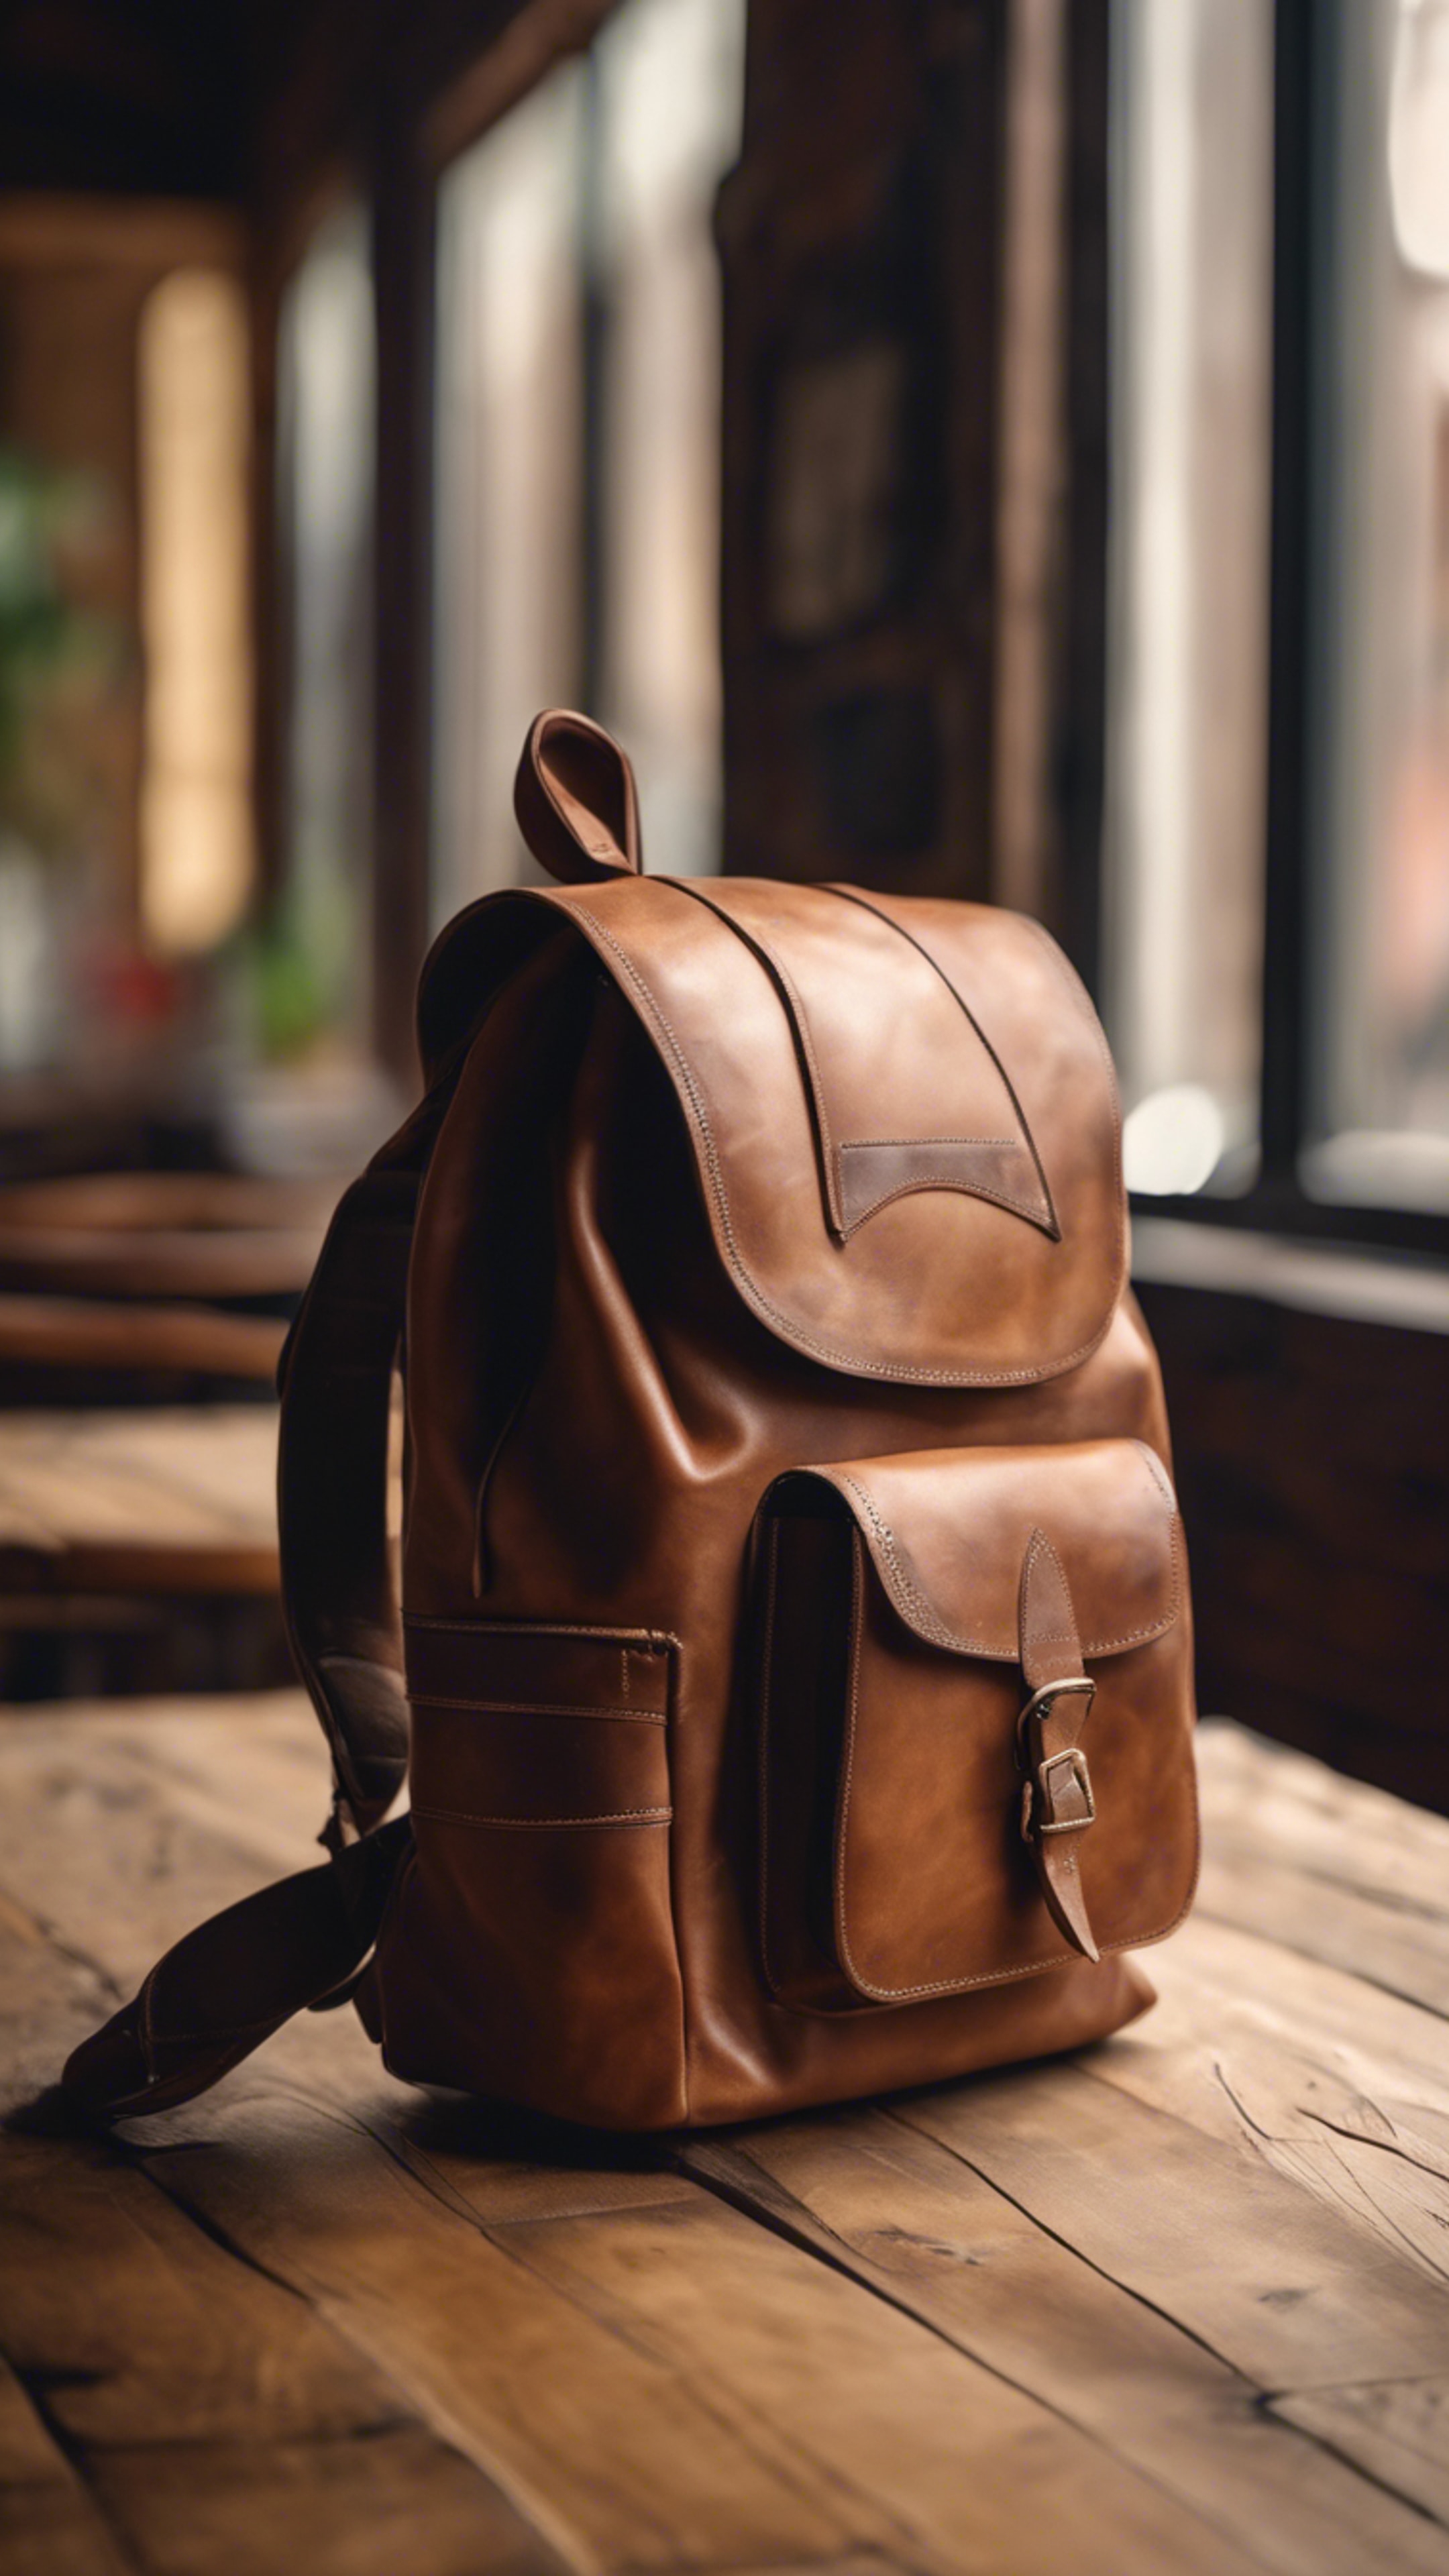 A vintage brown leather backpack sitting on a wooden table in a cozy café. Hintergrund[7ce12483b5e34217b072]